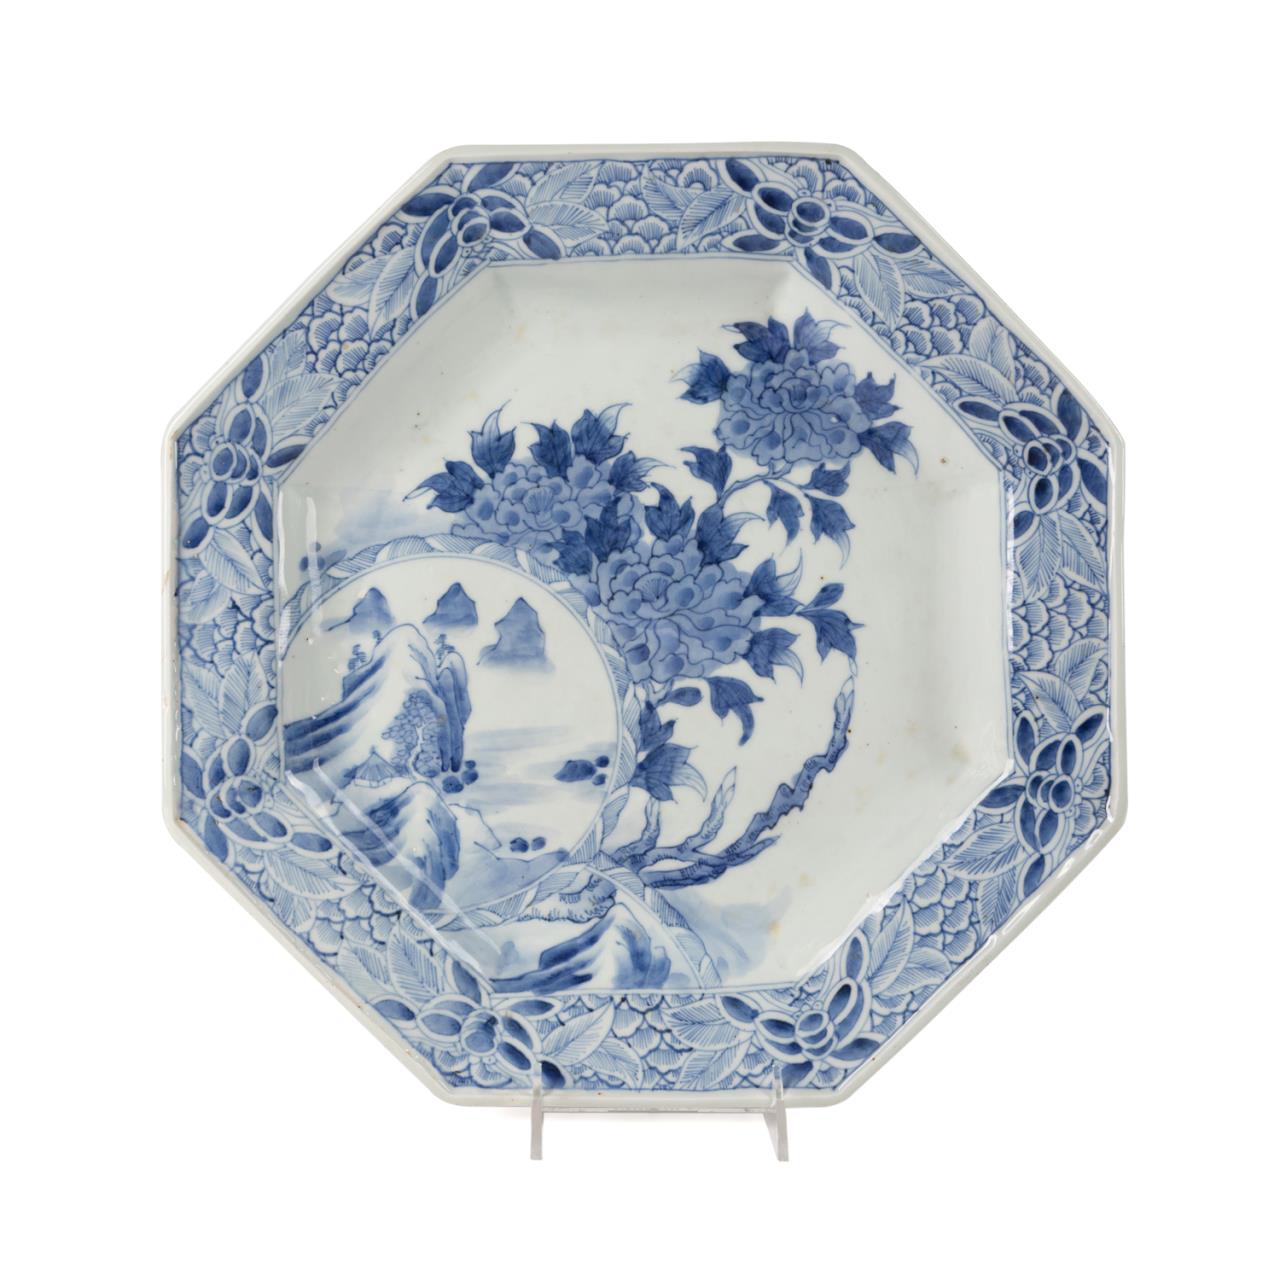 CHINESE MING STYLE BLUE WHITE 3cd397